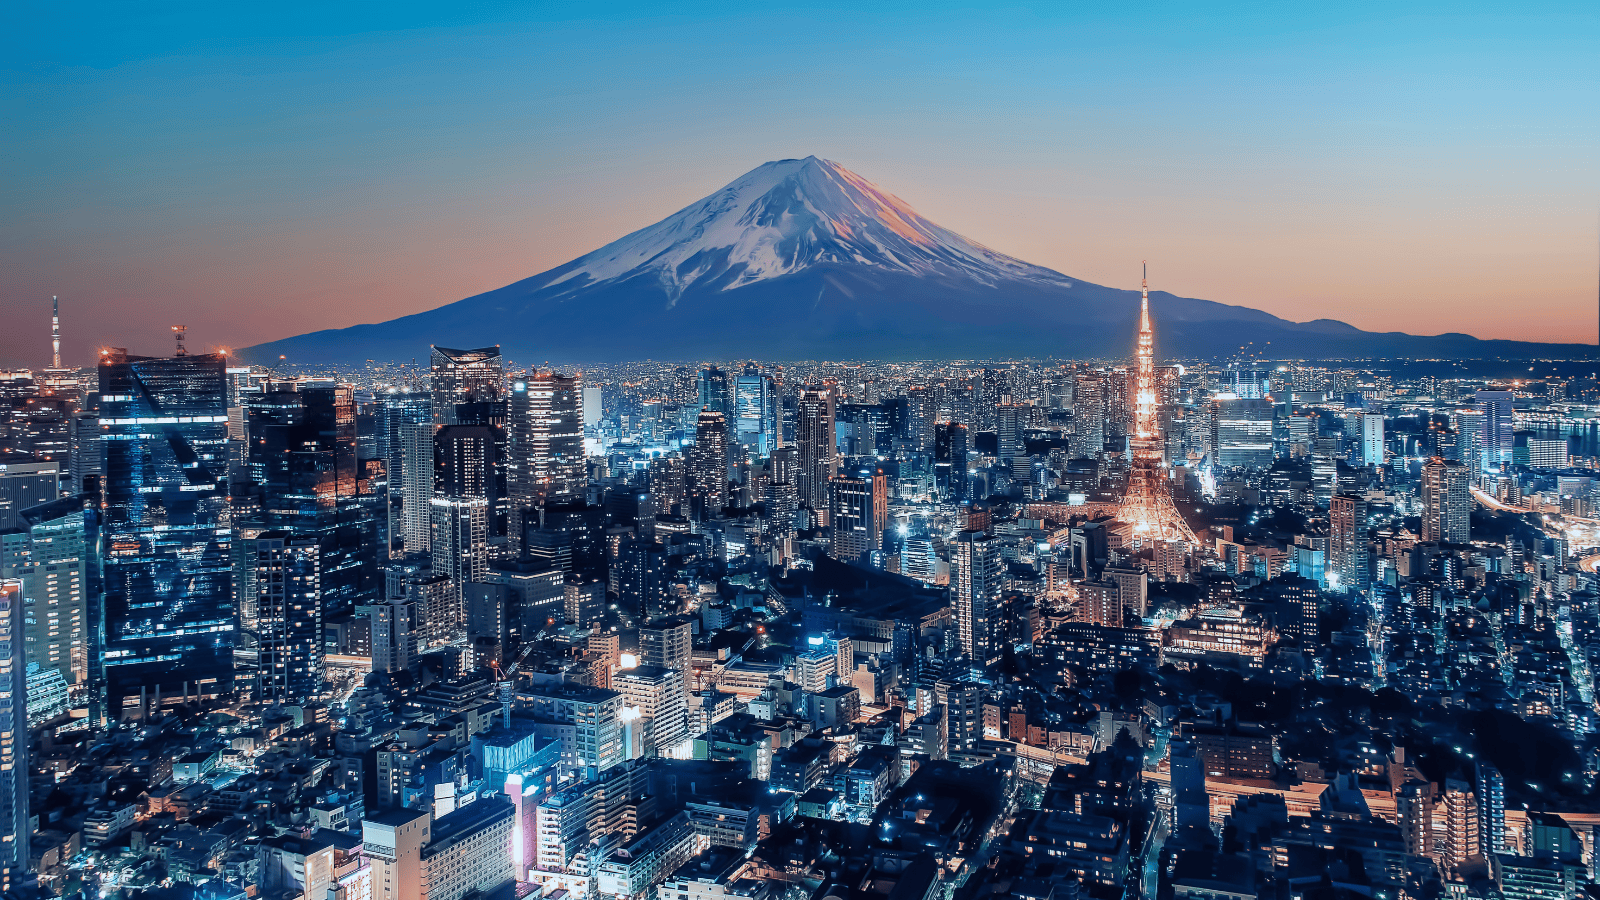 <p>Travelers with disabilities will enjoy touring the Japanese city of Tokyo. According to <a href="https://www.gotokyo.org/en/plan/accessibility/index.html#:~:text=Tokyo%20is%20an%20accessible%20city,the%20very%20best%20of%20Tokyo." rel="nofollow external noopener noreferrer">Go Tokyo</a>, most trains, bathrooms, and walking streets are designed to help disabled tourists navigate the city. </p><p>Accessibility has been at the forefront of Tokyo’s city planning, allowing everyone to enjoy its unique sights. Researching before your trip is helpful for a stress-free travel experience, but Tokyo welcomes visitors of all abilities.</p>